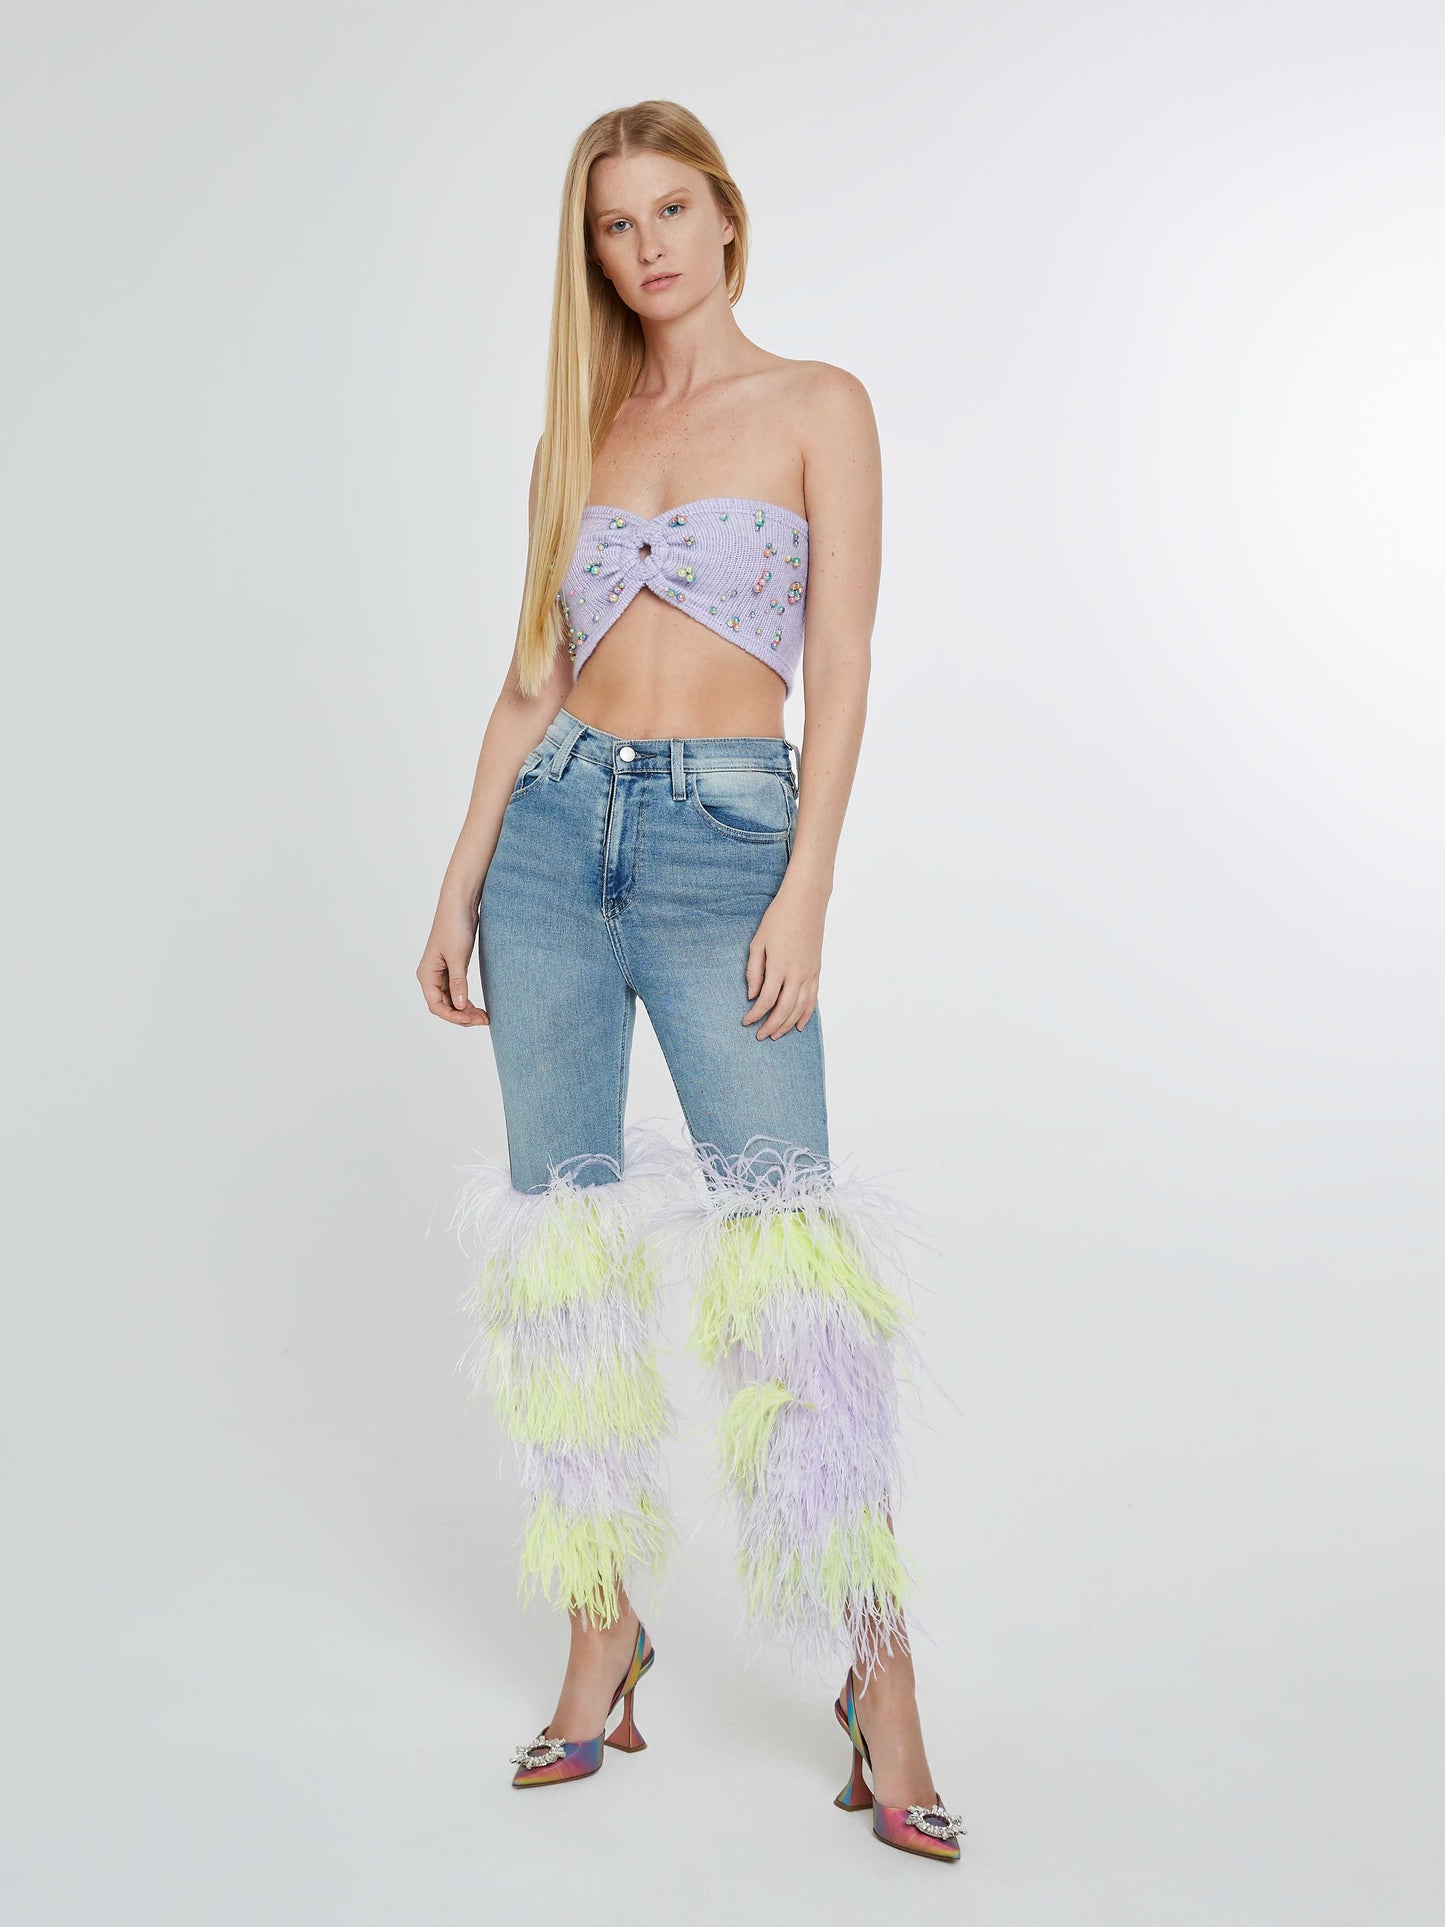 Jeans with neon yellow and purple feathers fringe